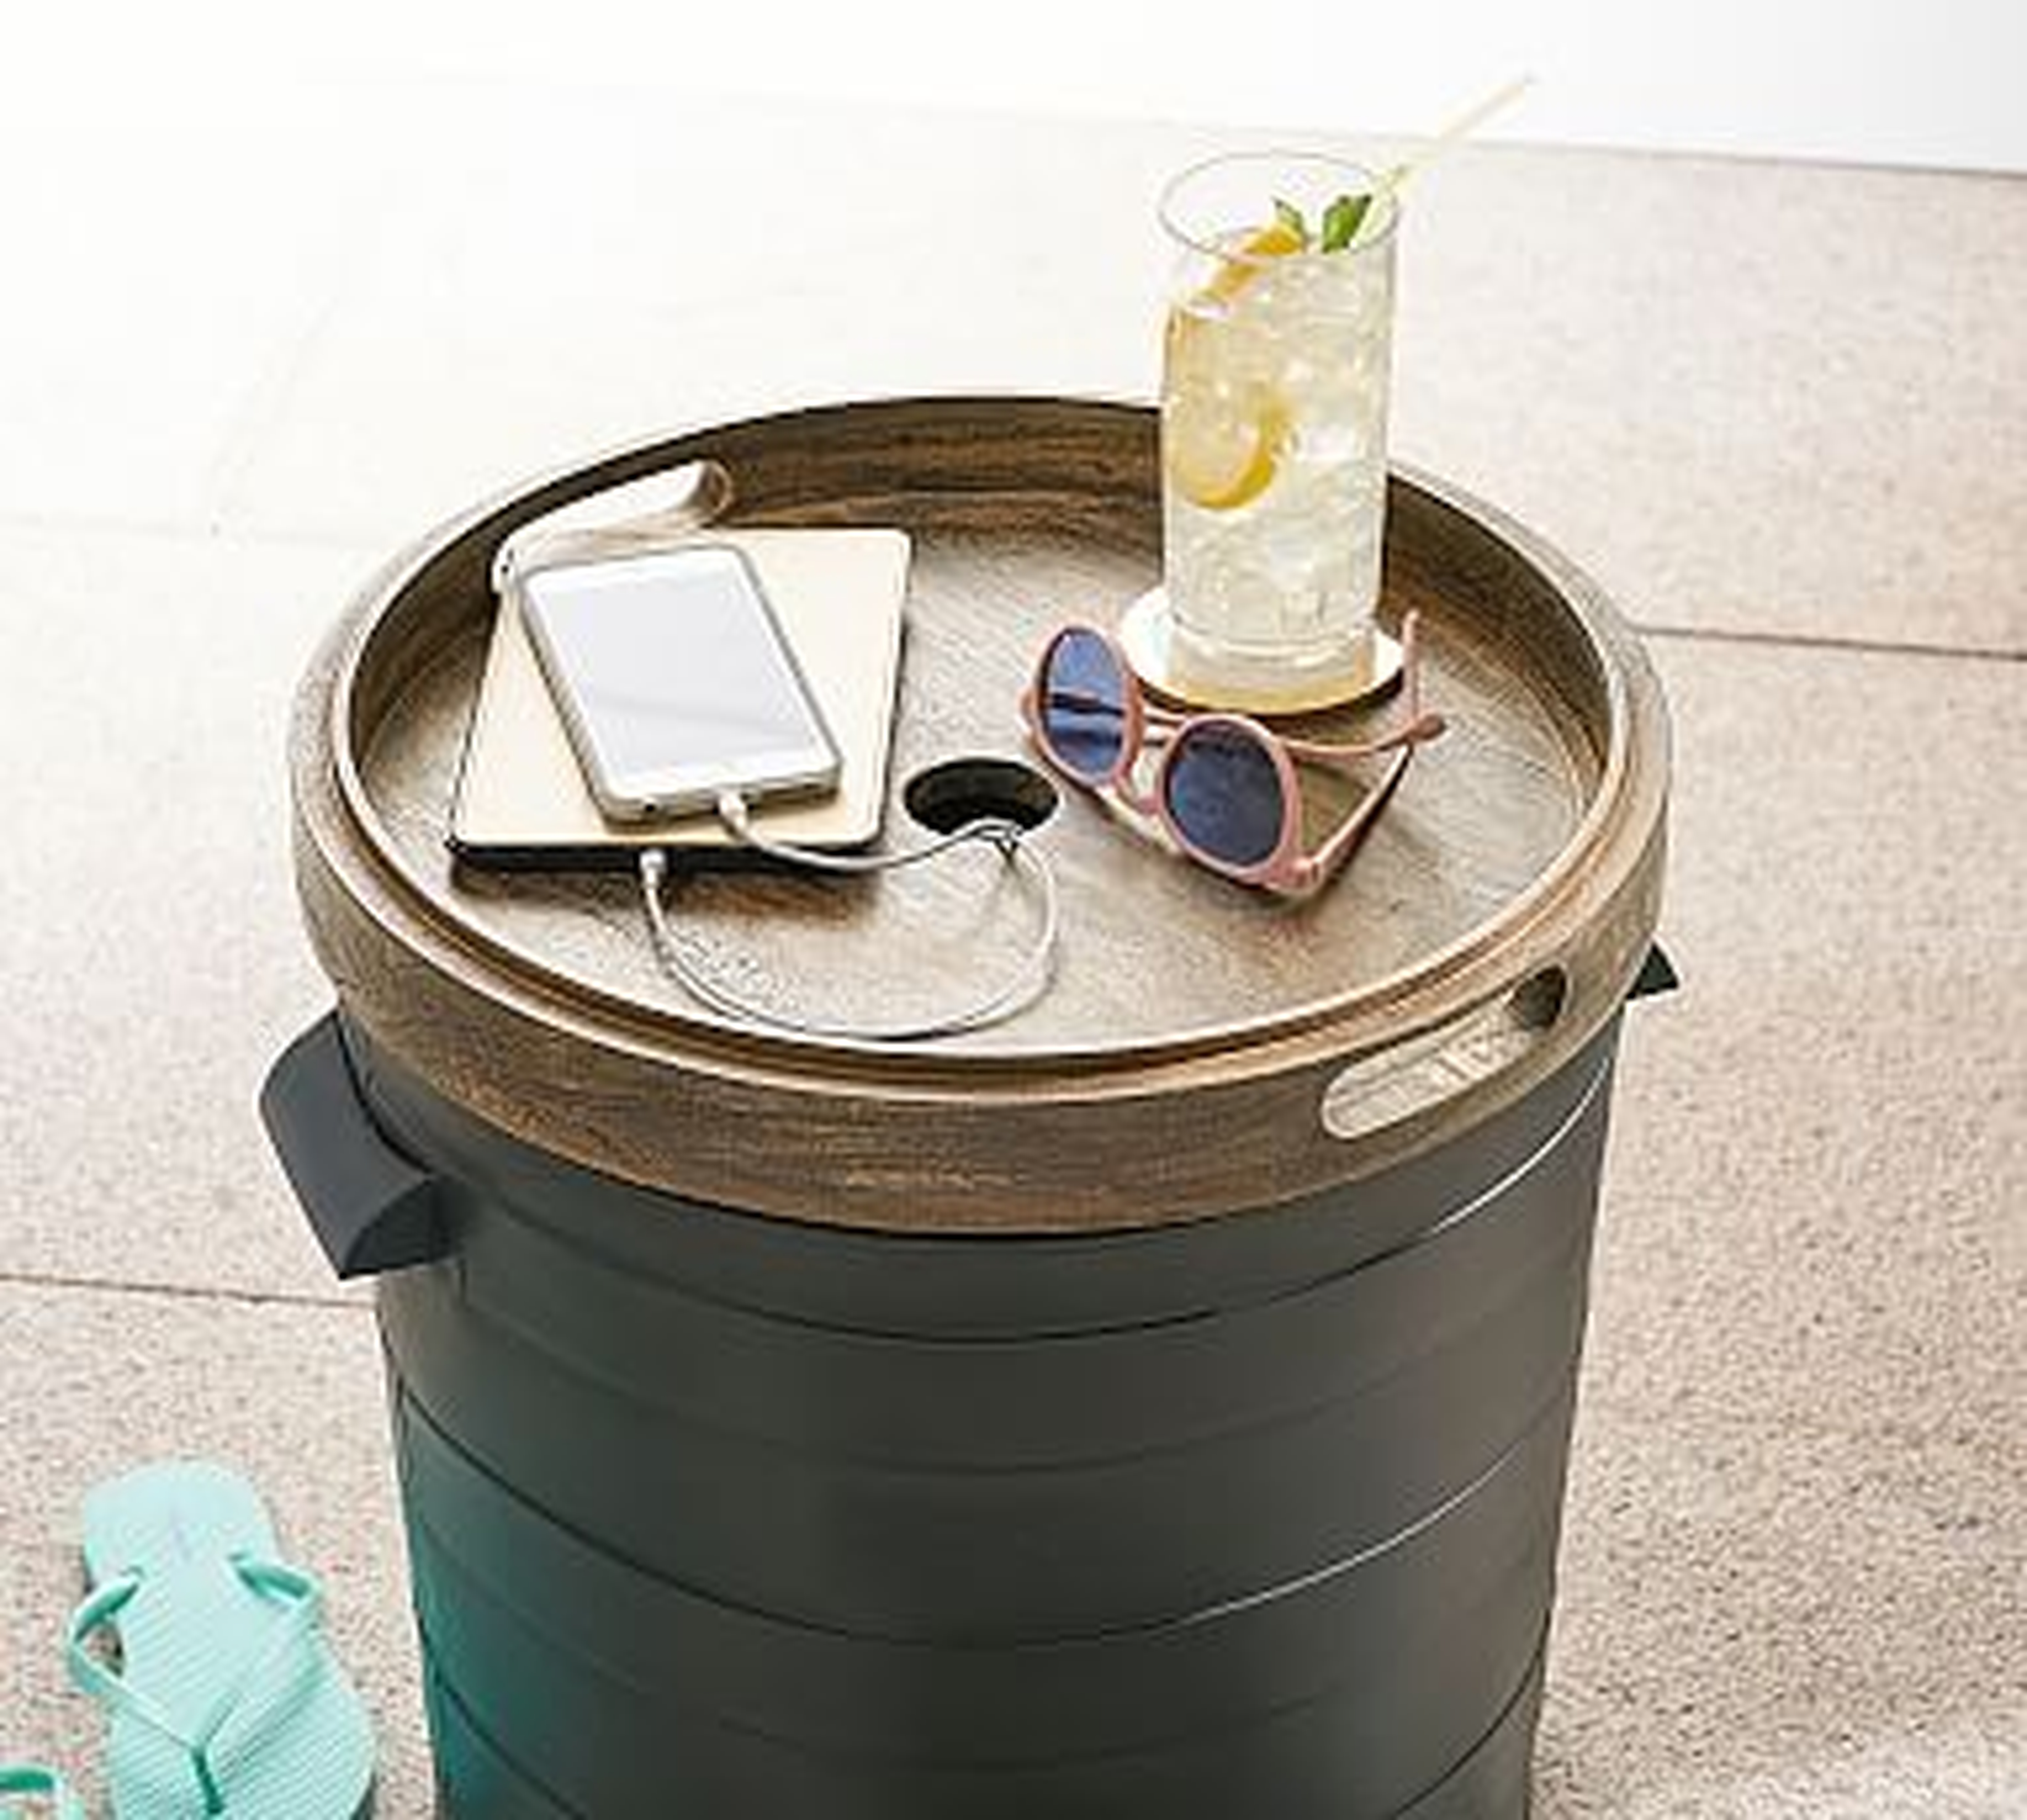 Pool Storage Bin With Charging Station - Bronze - Pottery Barn